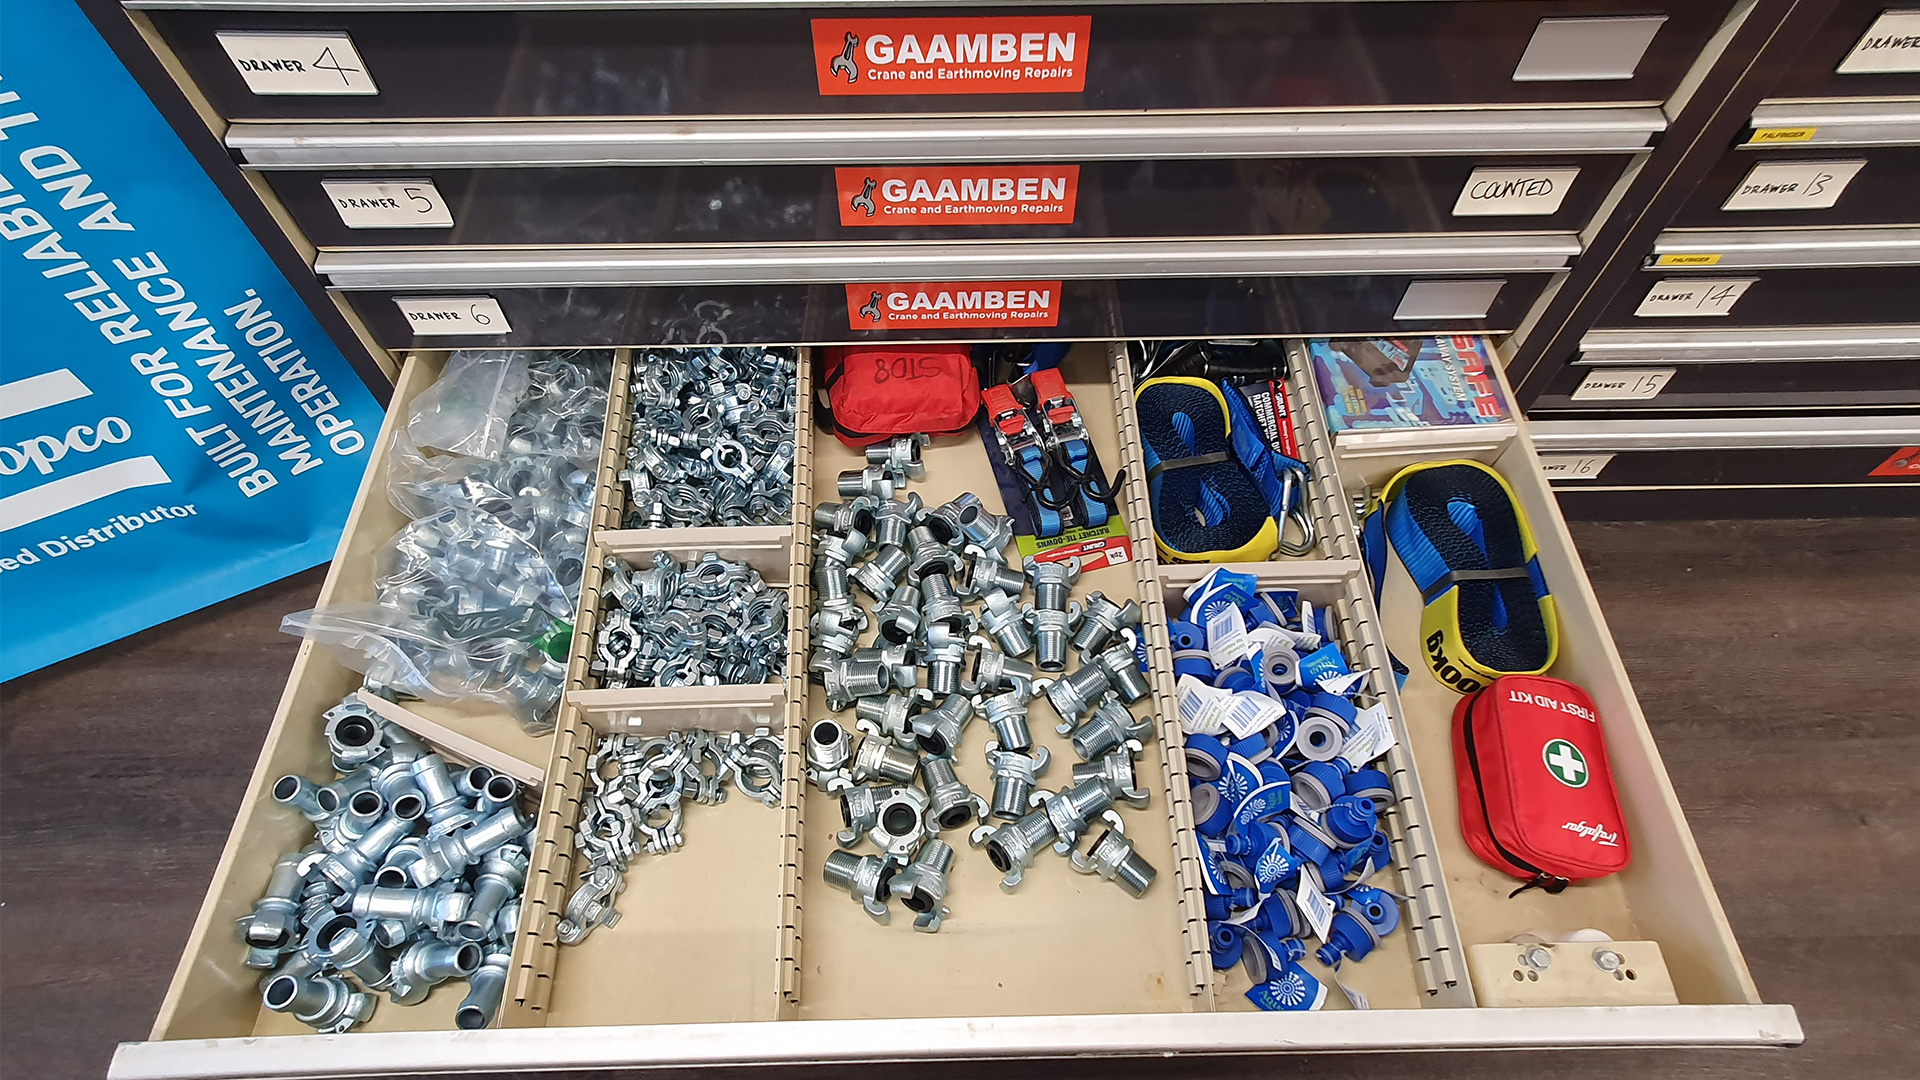 Gaamben stocks and supplies competitively priced genuine and non-genuine parts